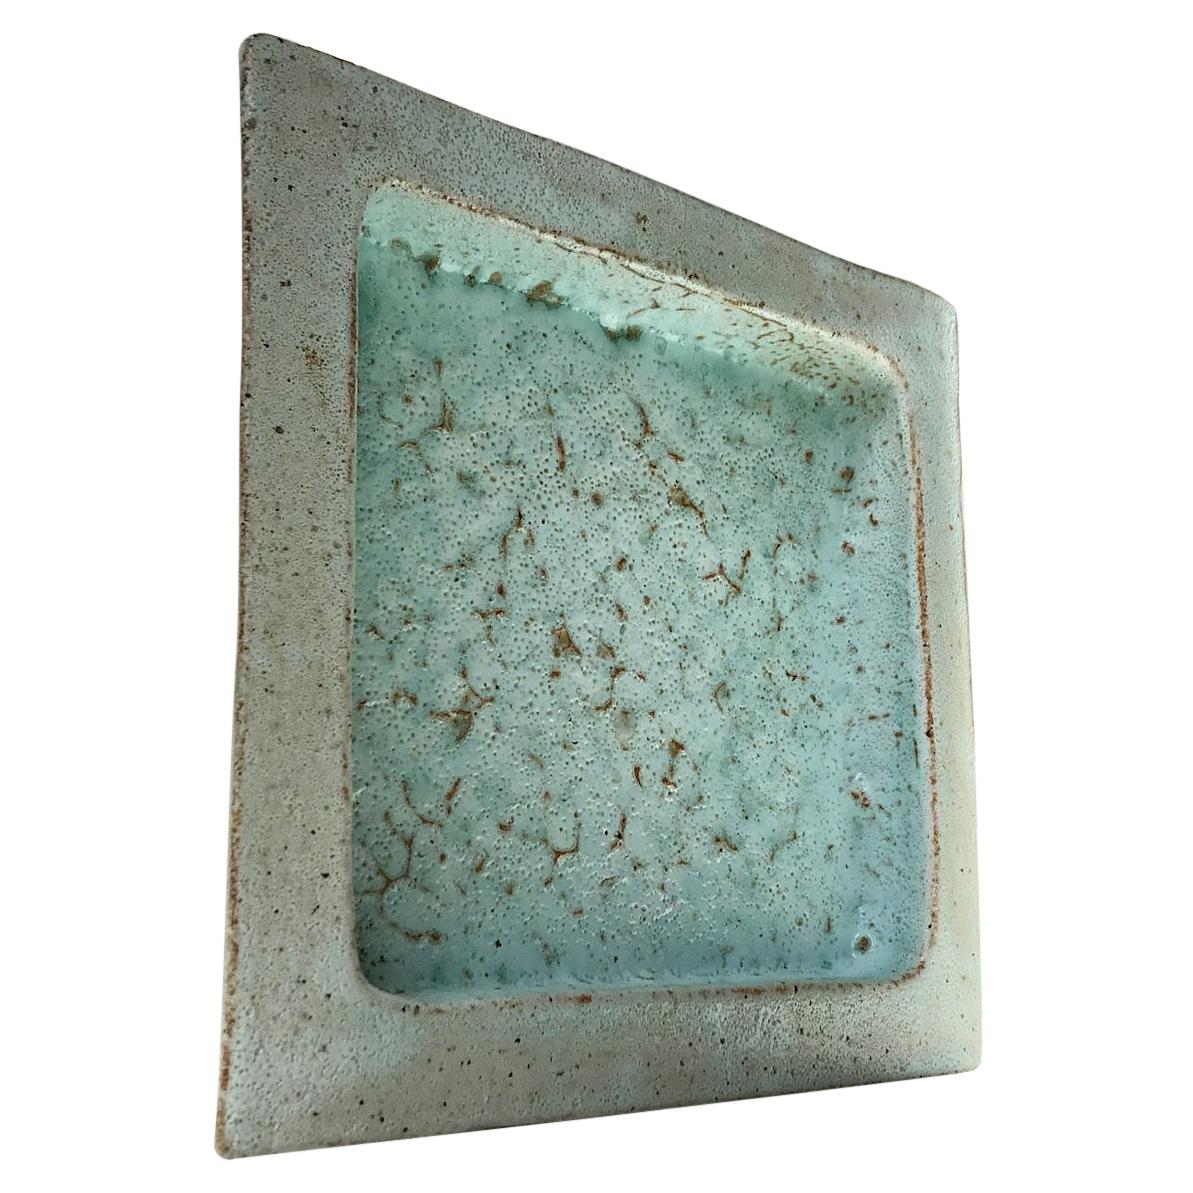 Square Ceramic Raku Fired Turquoise Dish by Sten Borsting For Sale